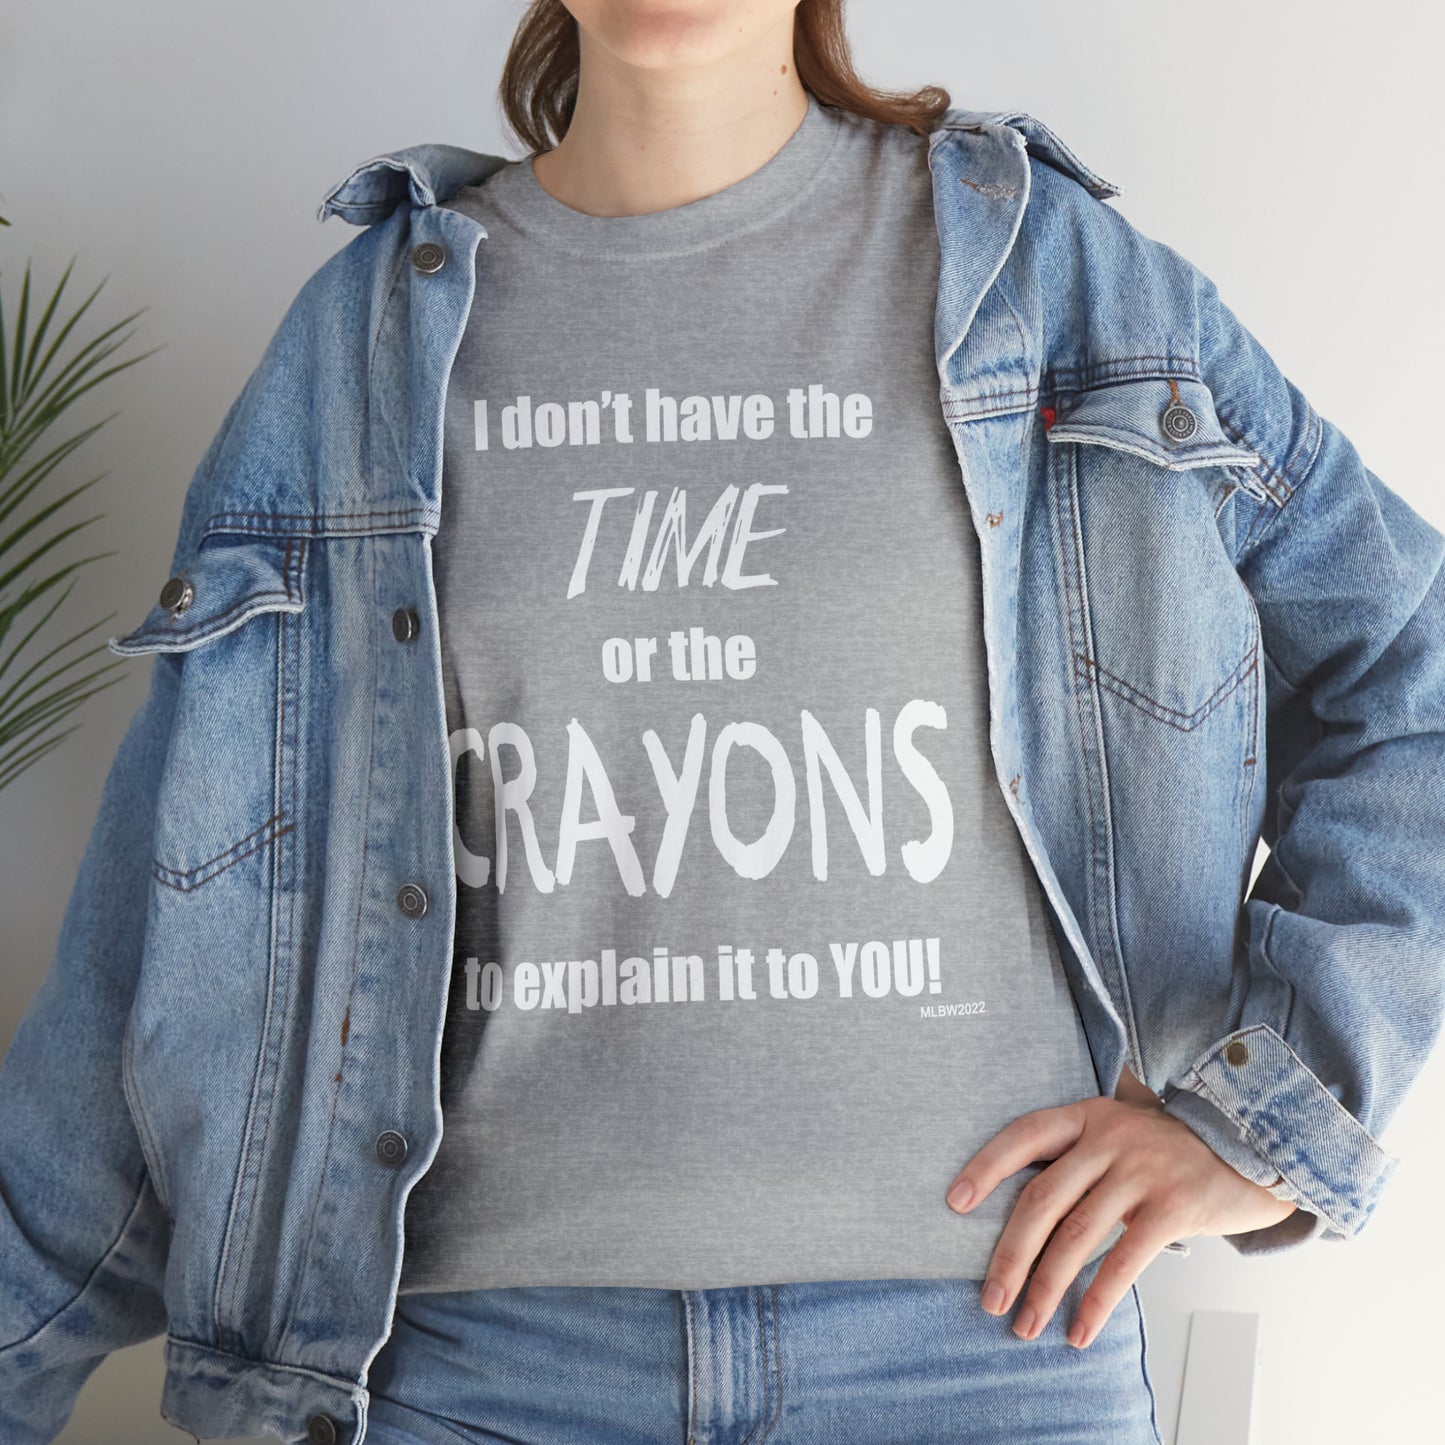 Don't have the TIME or the CRAYONS - Printed in the EU - Unisex Heavy Cotton Tee